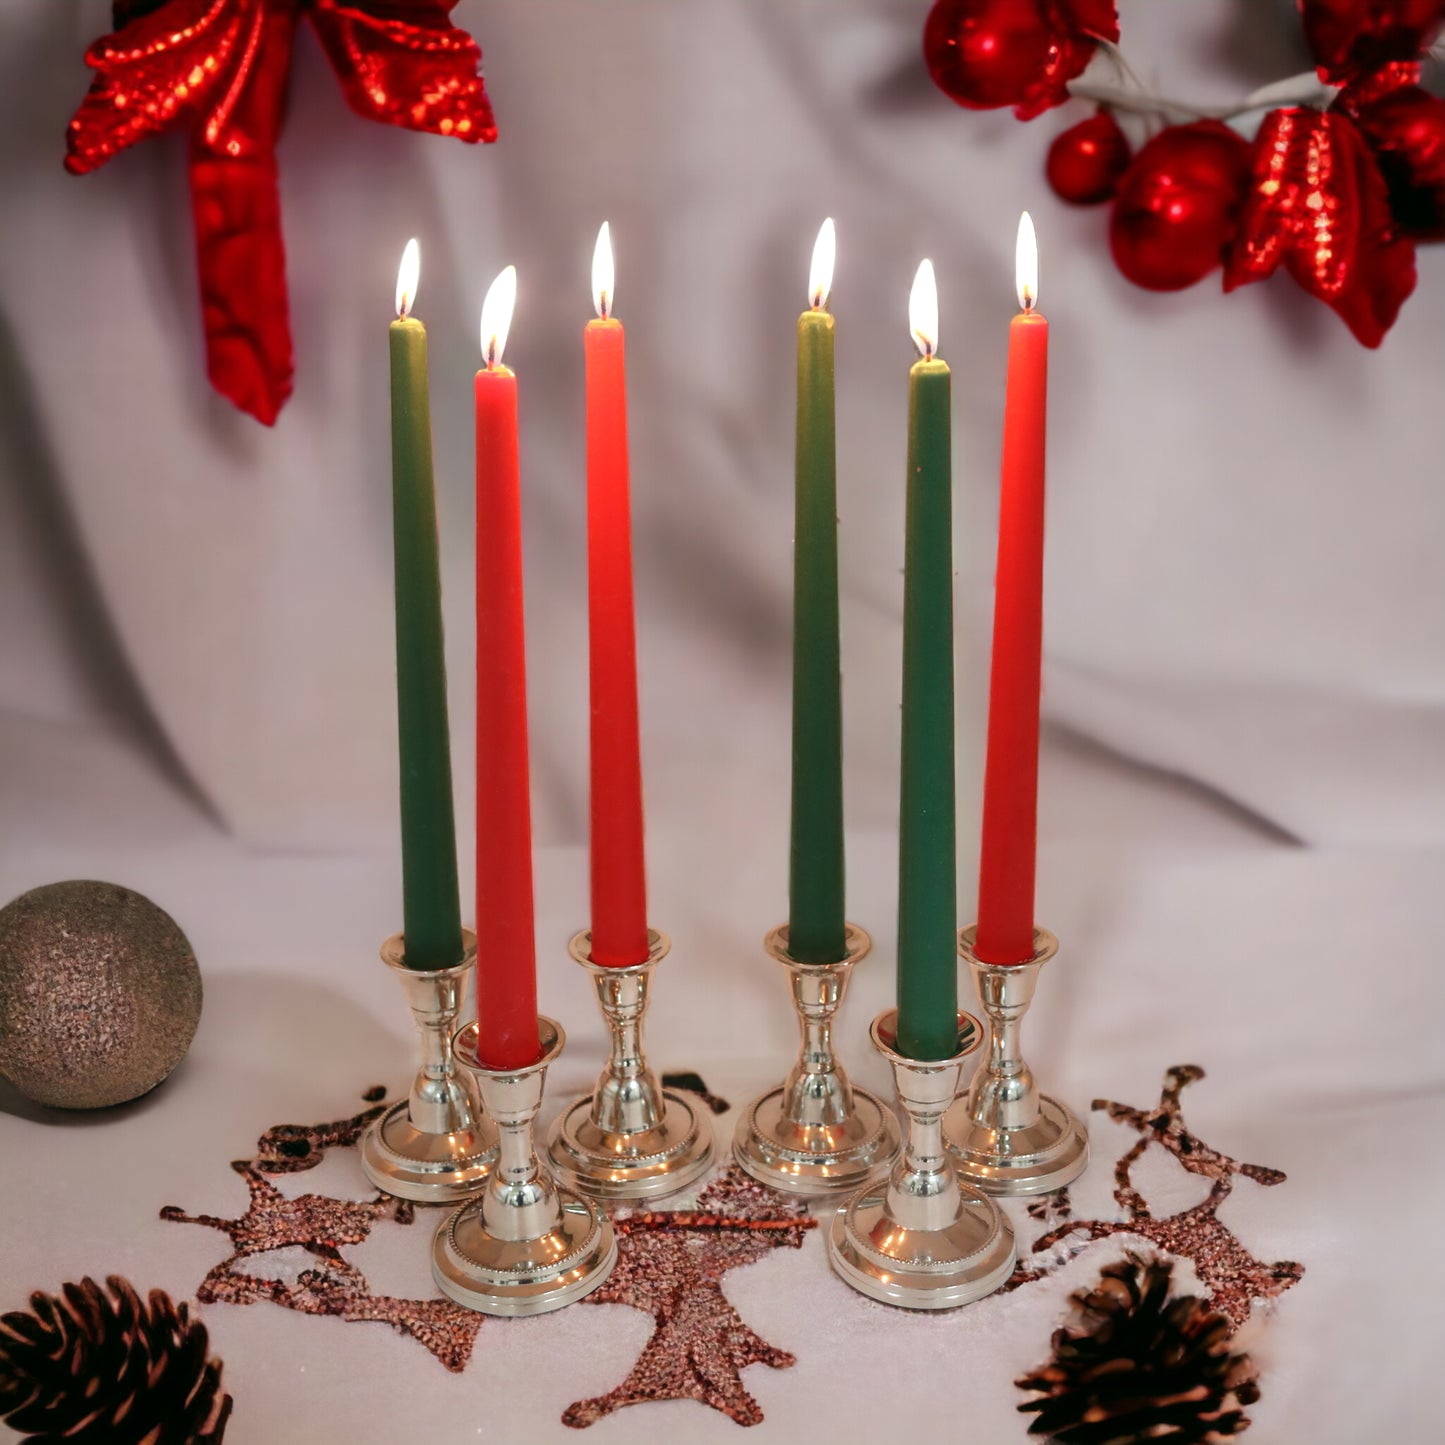 Hosley 6-Piece Unscented Green & Red Taper Candles Set - 25CM